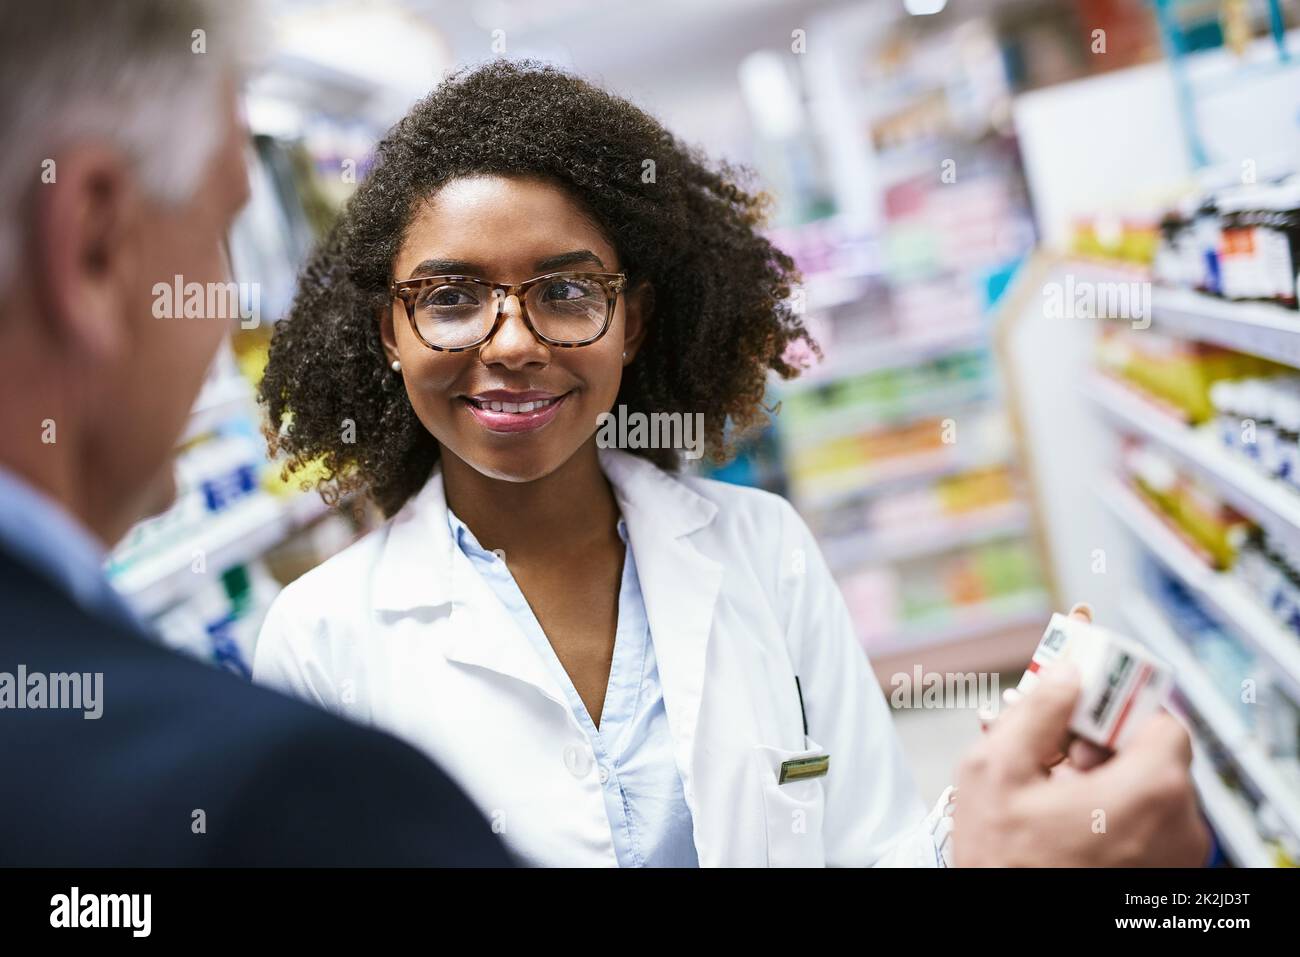 Ill take one thank you. Shot of a helpful young female pharmacist helping a customer with choosing the right medication in the pharmacy. Stock Photo